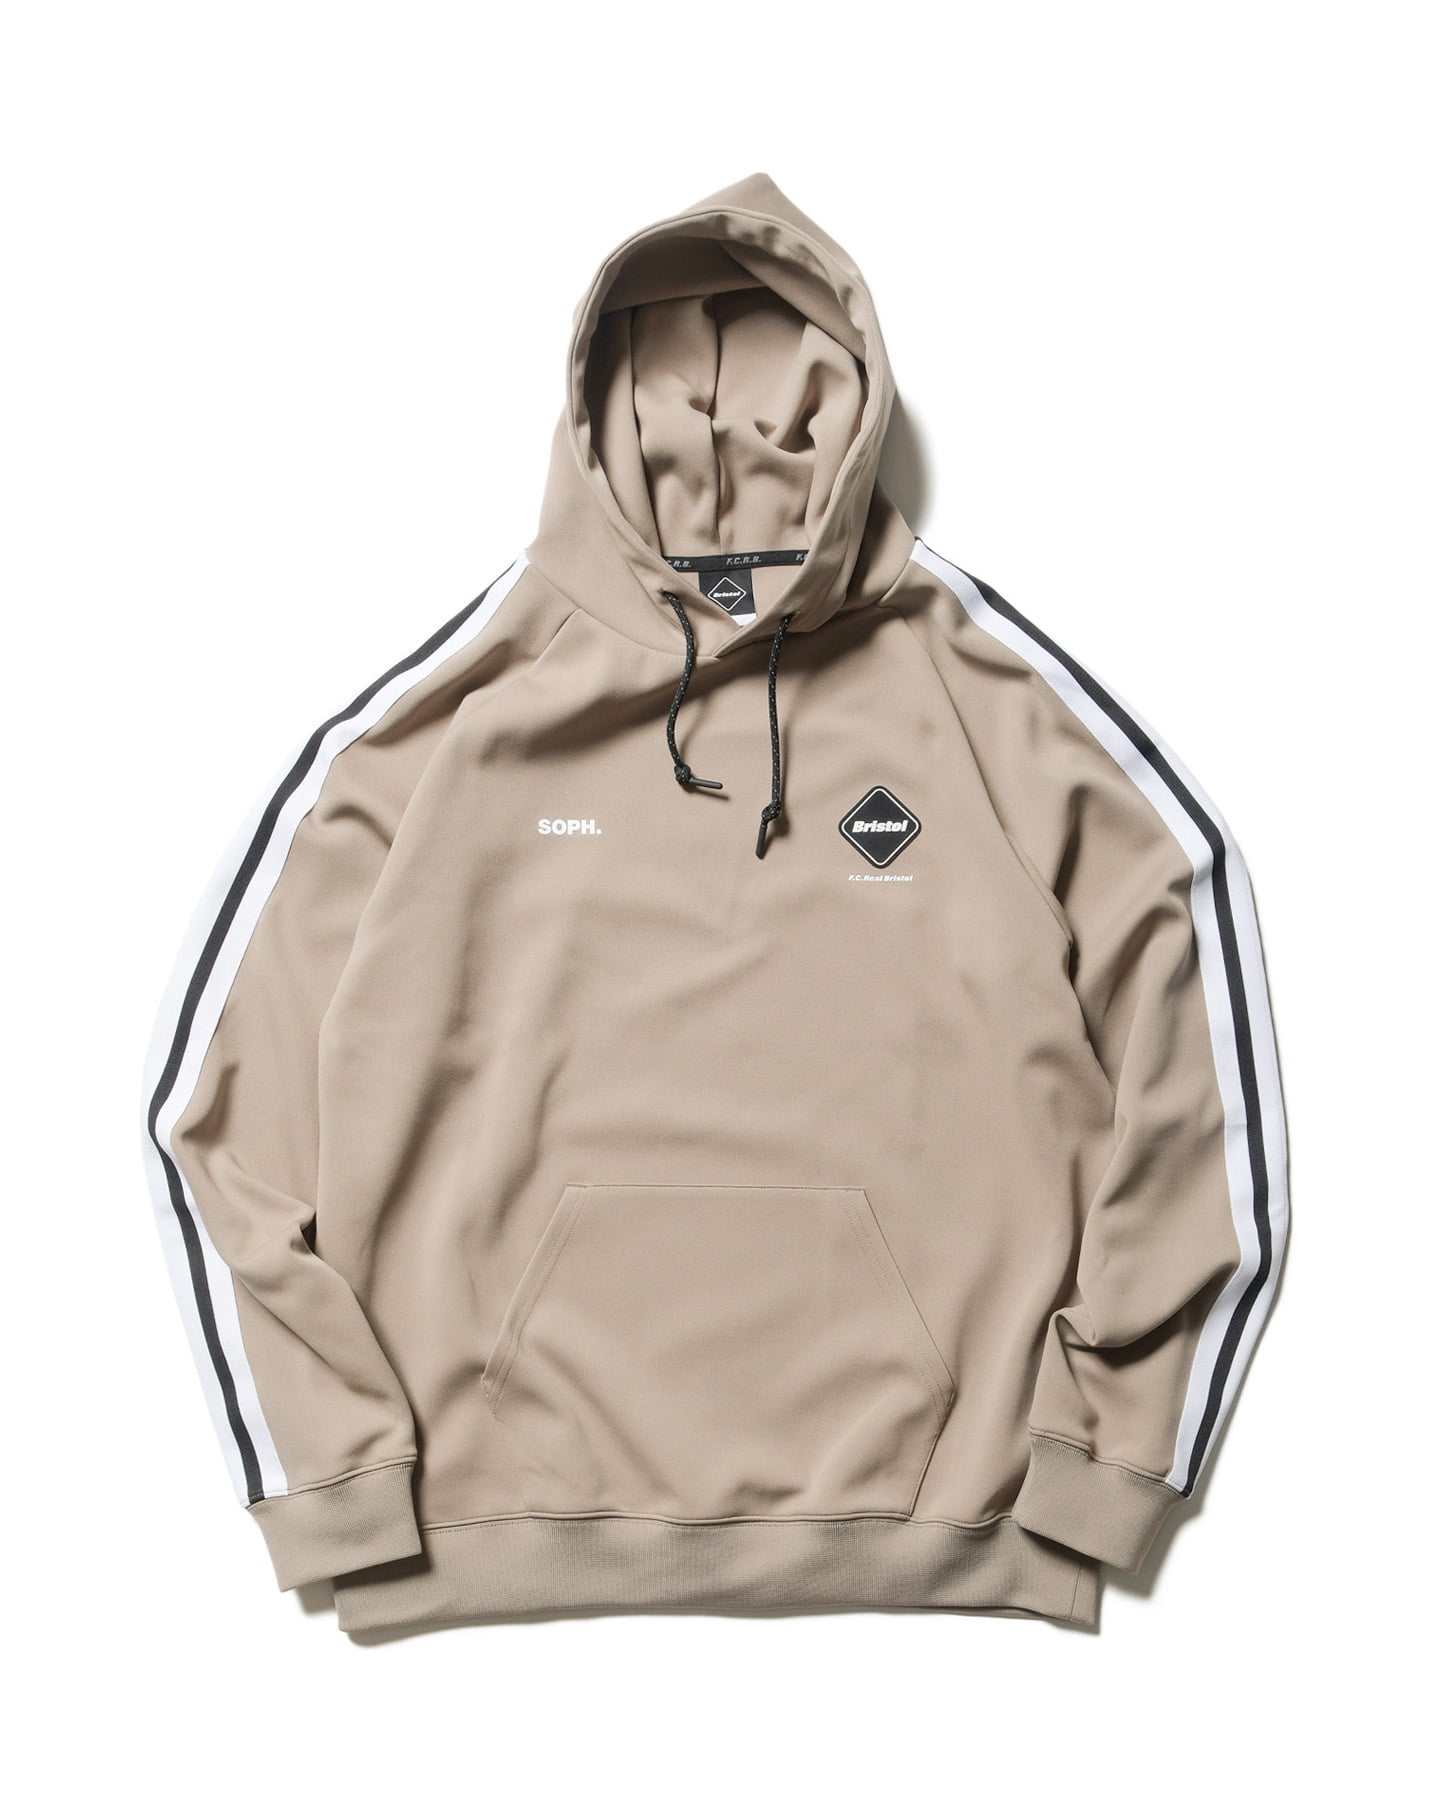 23aw FCRB TRAINING TRACK HOODIE soph